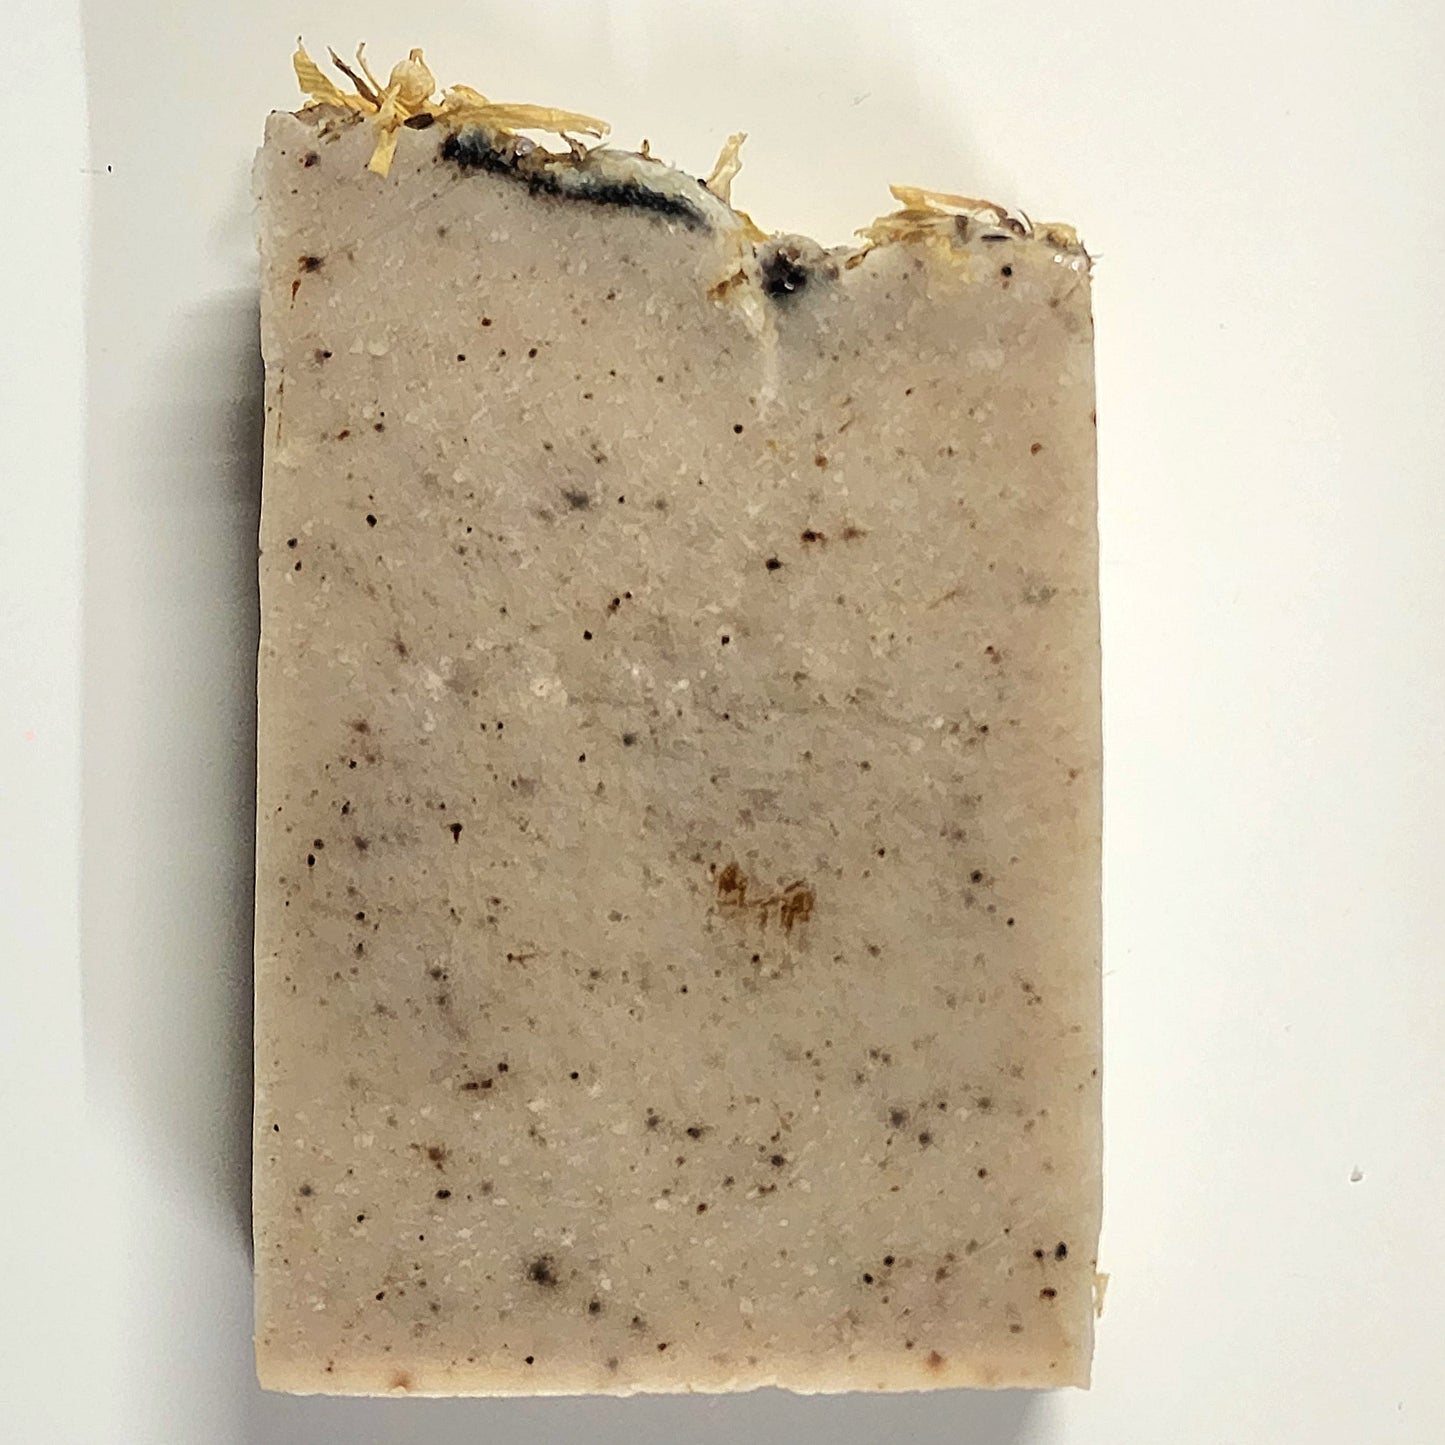 Gardener Bar Soap – Rosemary, Peppermint, Spearmint, and Lavender with scrubby botanicals